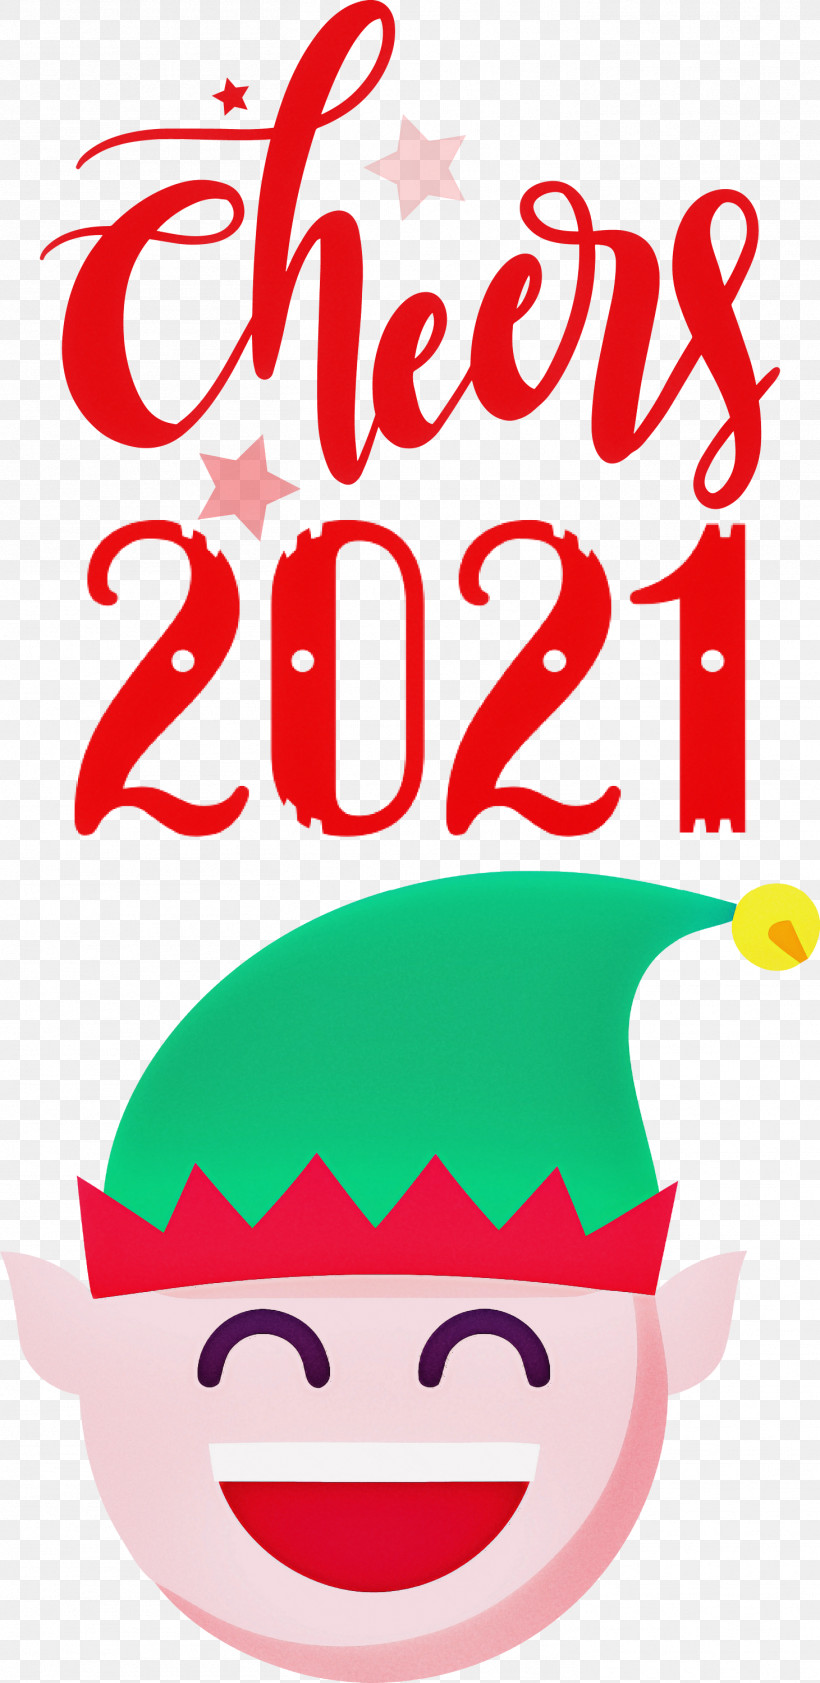 Cheers 2021 New Year Cheers.2021 New Year, PNG, 1461x3000px, Cheers 2021 New Year, Artfree, Free, Silhouette Download Free